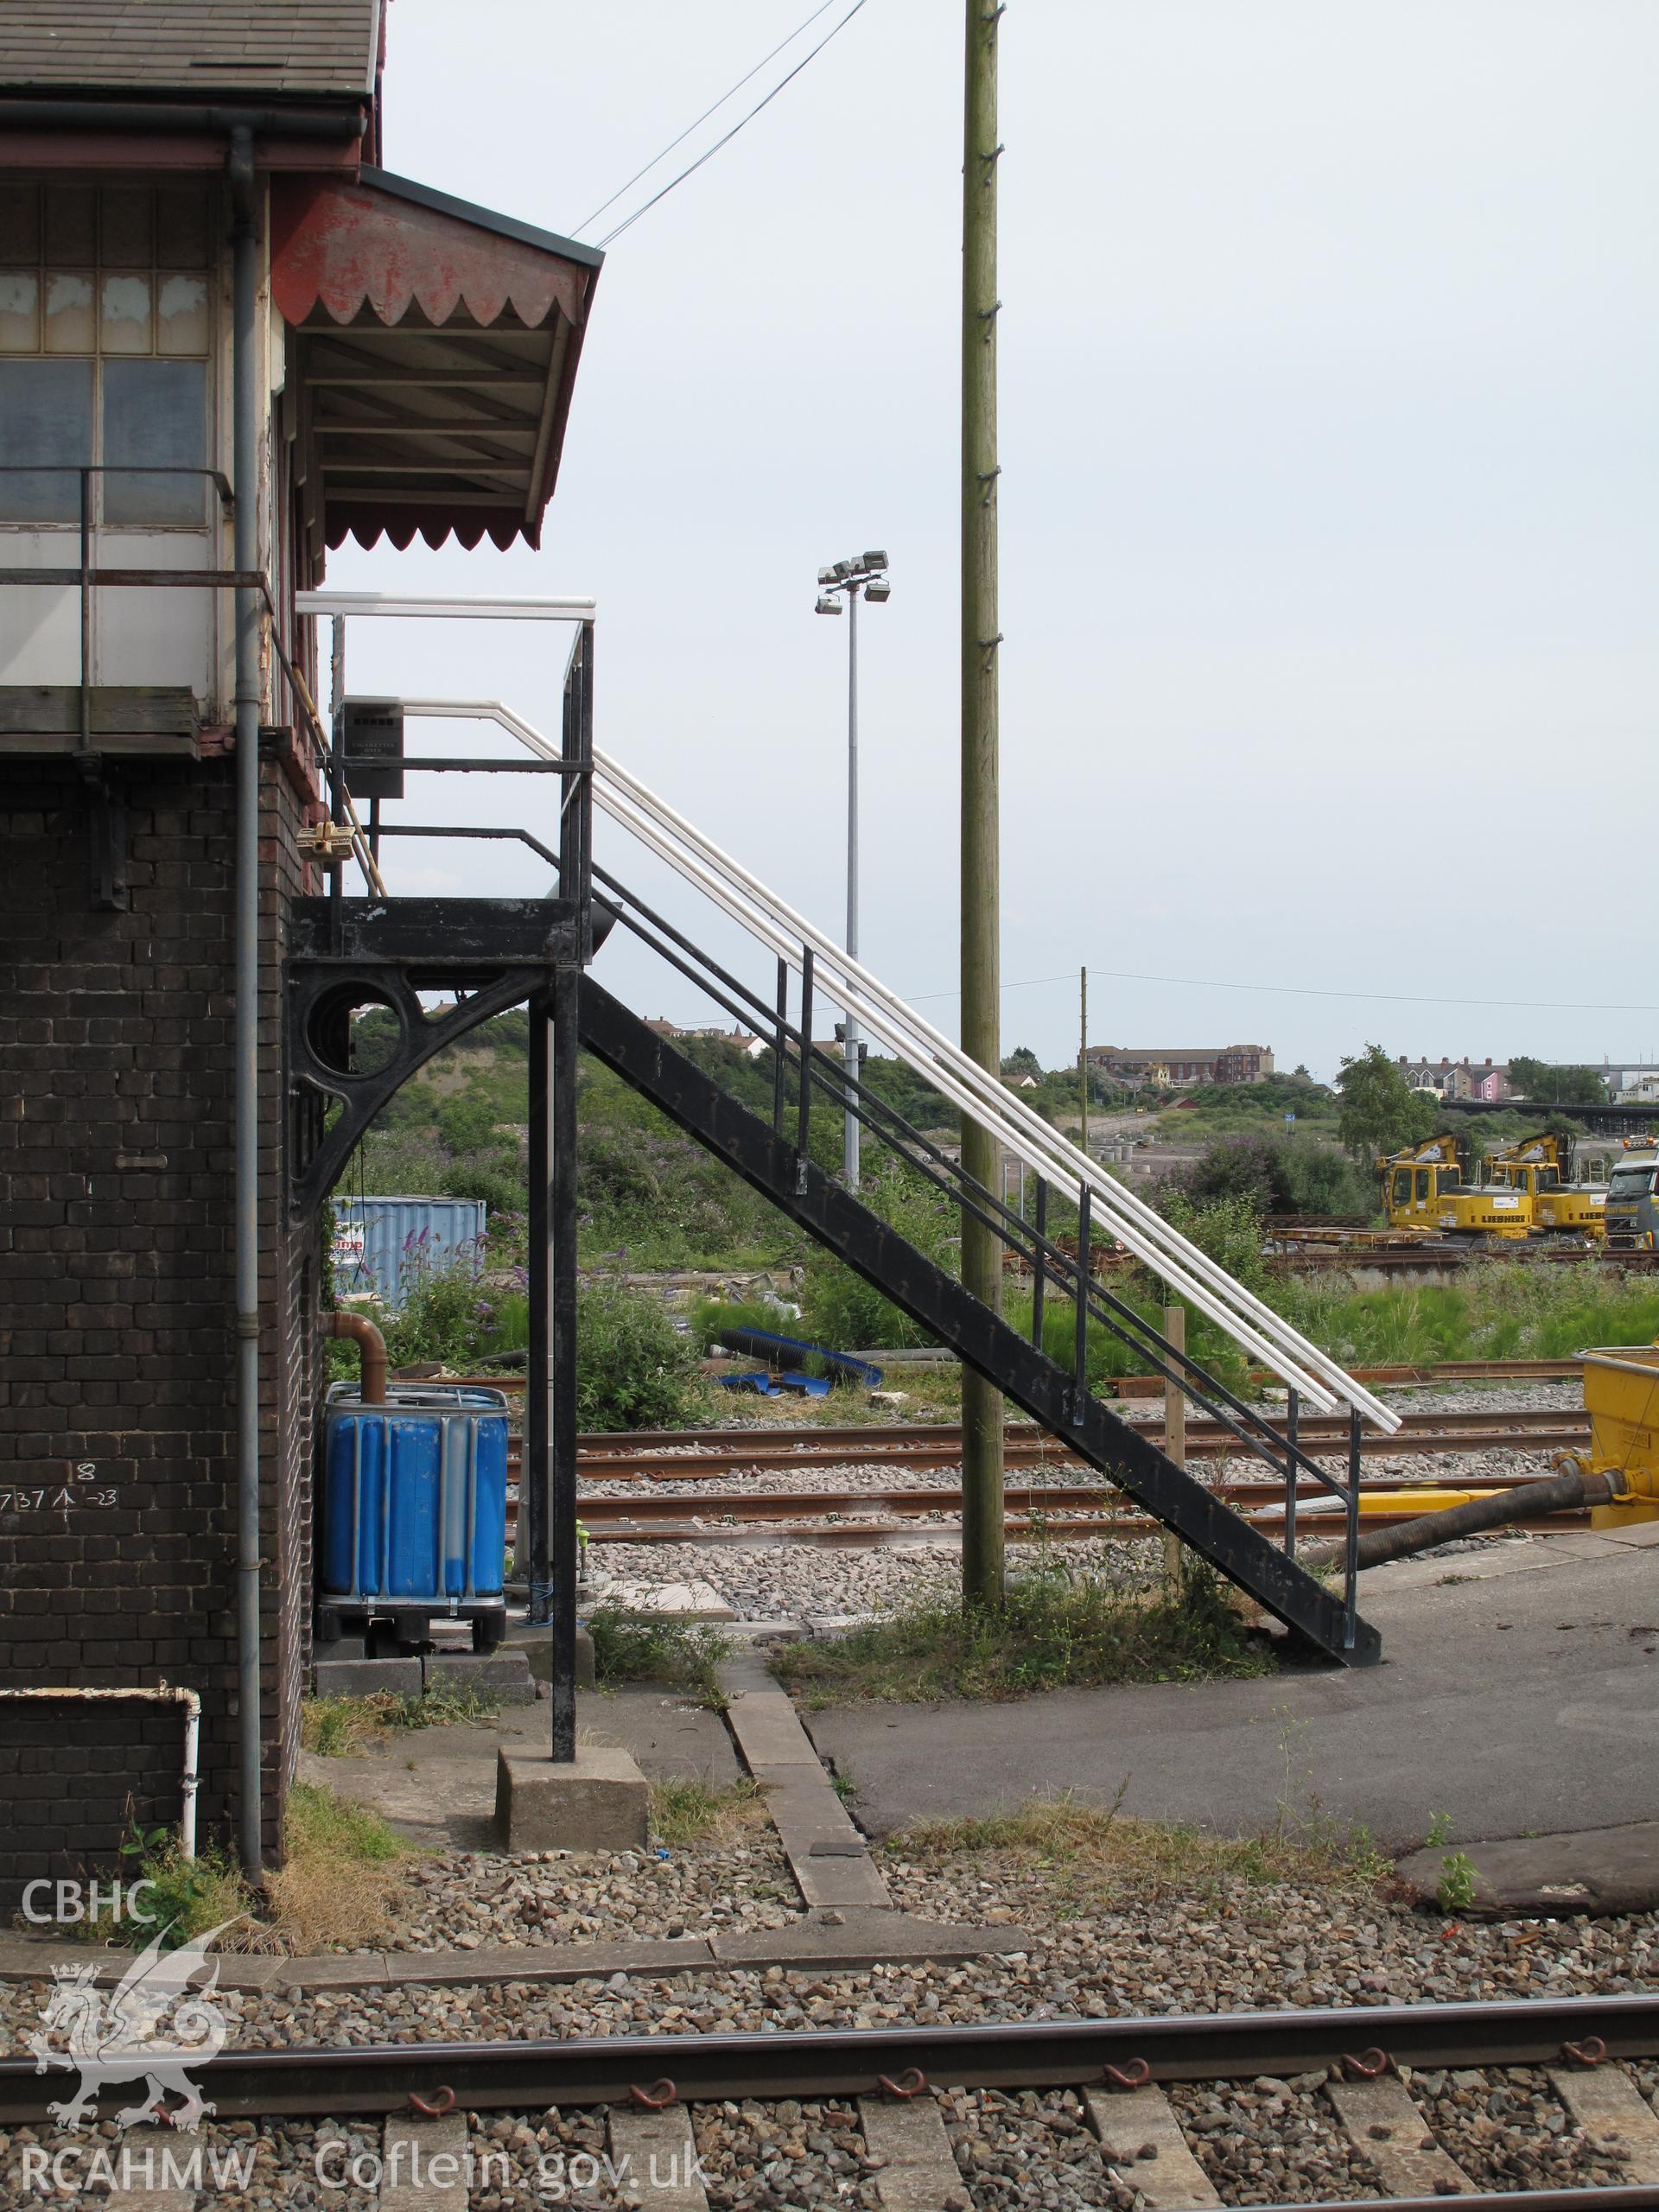 View from the northwest of the stair and verandah at Barry Station Signalbox.